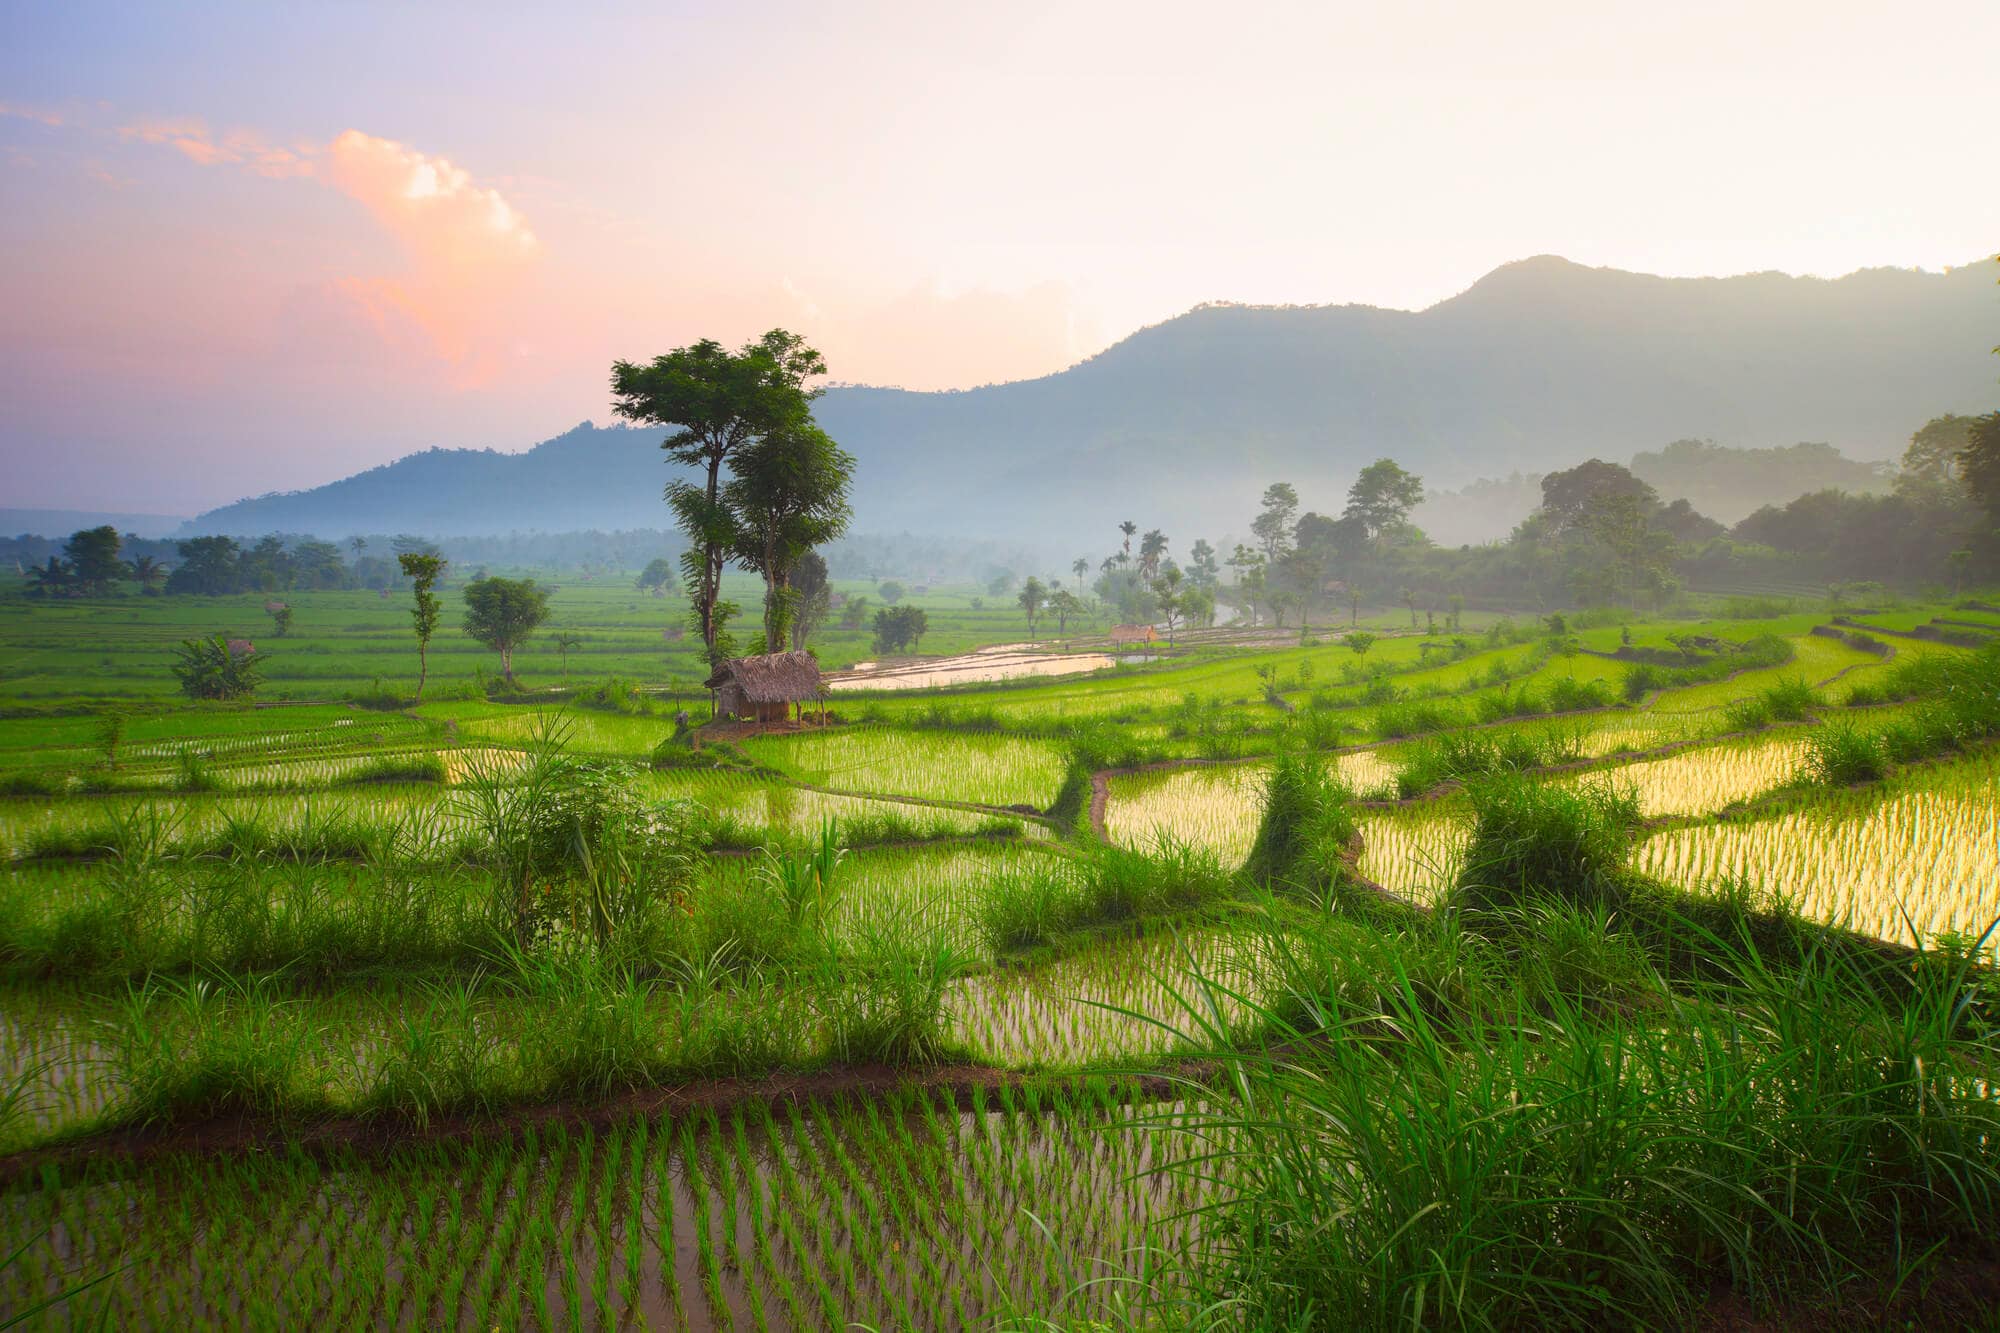 Sunrise over rice fields in Bali - things you need to know before visiting Bali